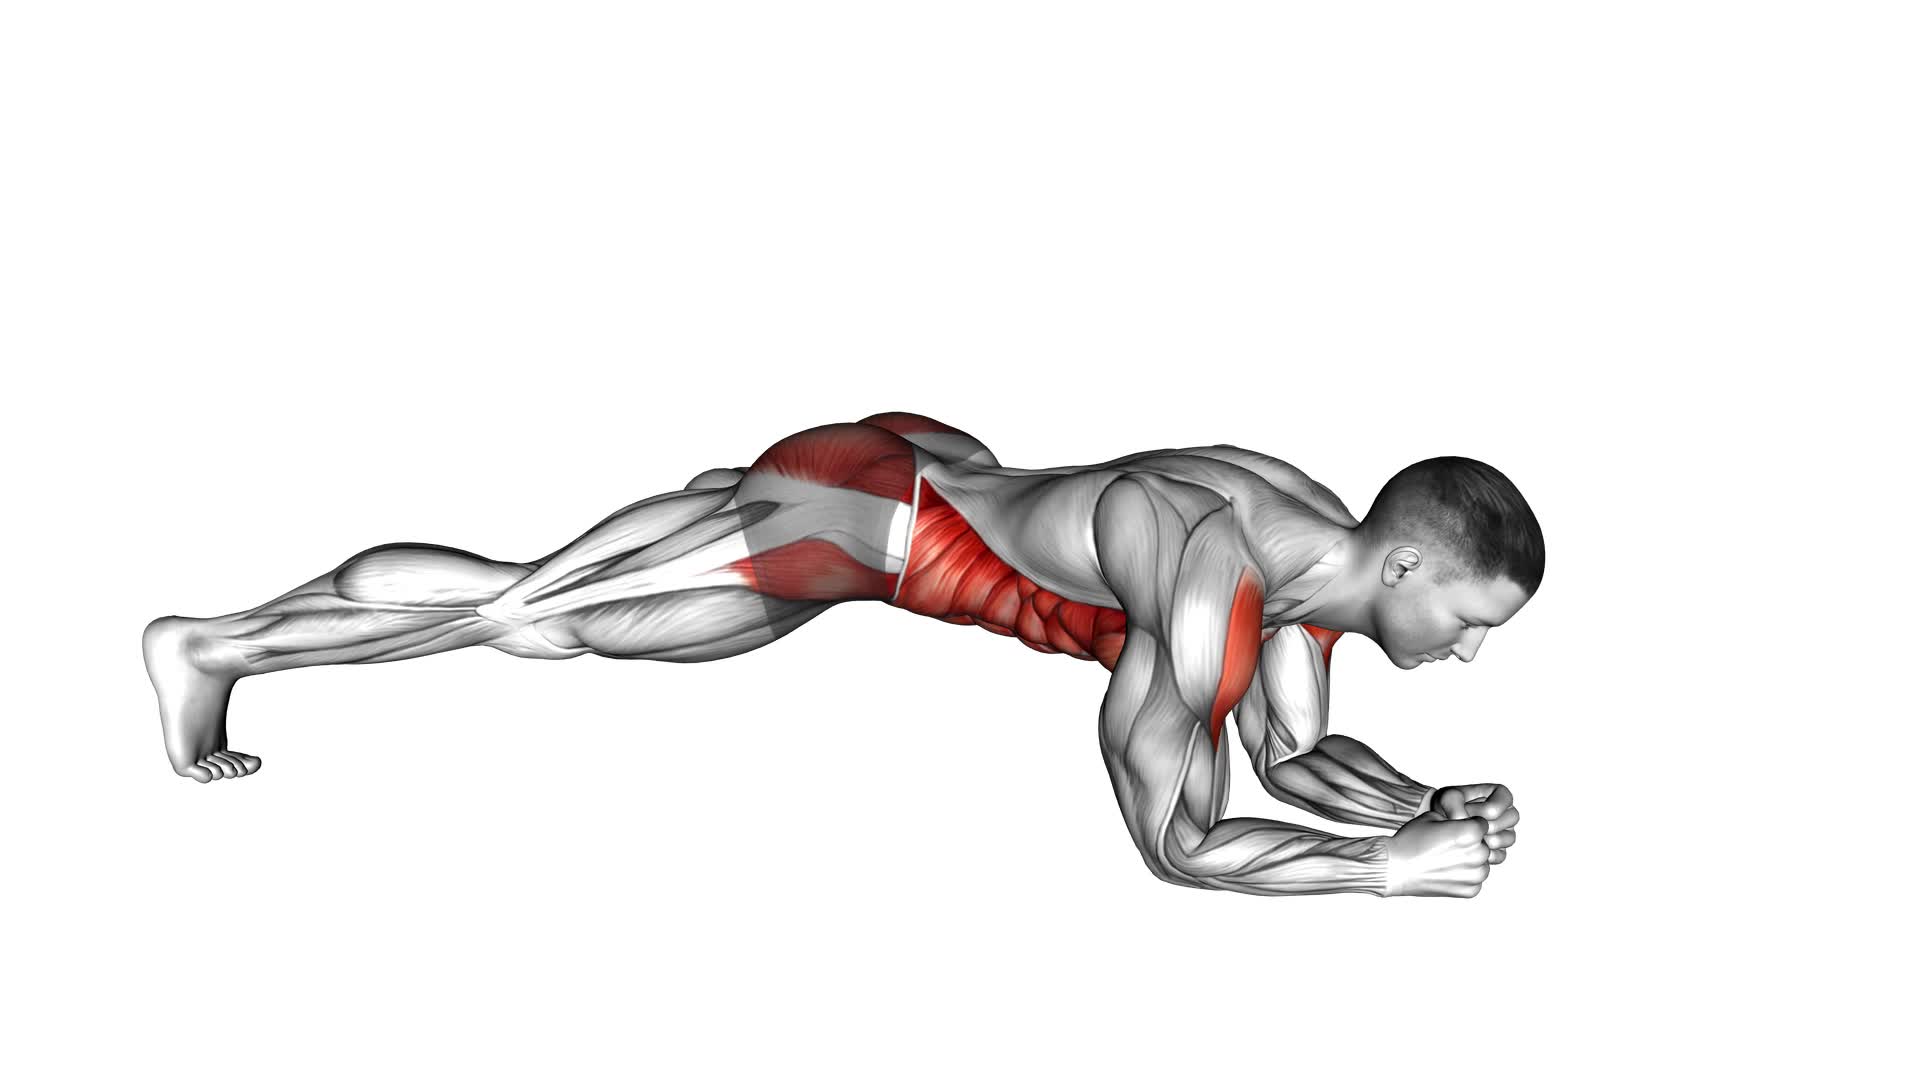 Plank Jack on Elbows - Video Exercise Guide & Tips